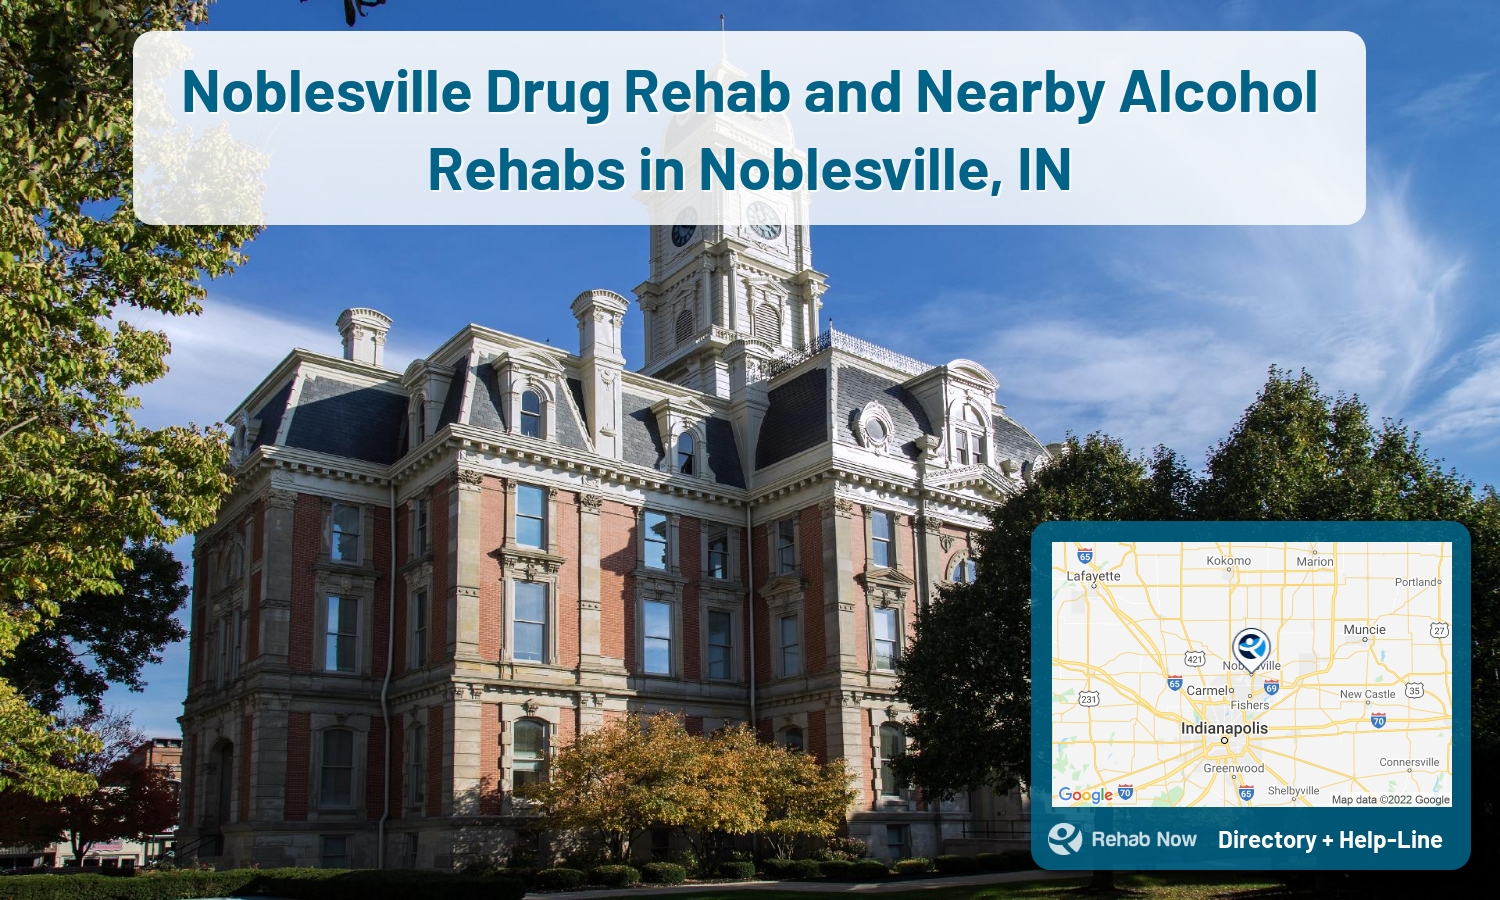 Drug rehab and alcohol treatment services near you in Noblesville, Indiana. Need help choosing a center? Call us, free.